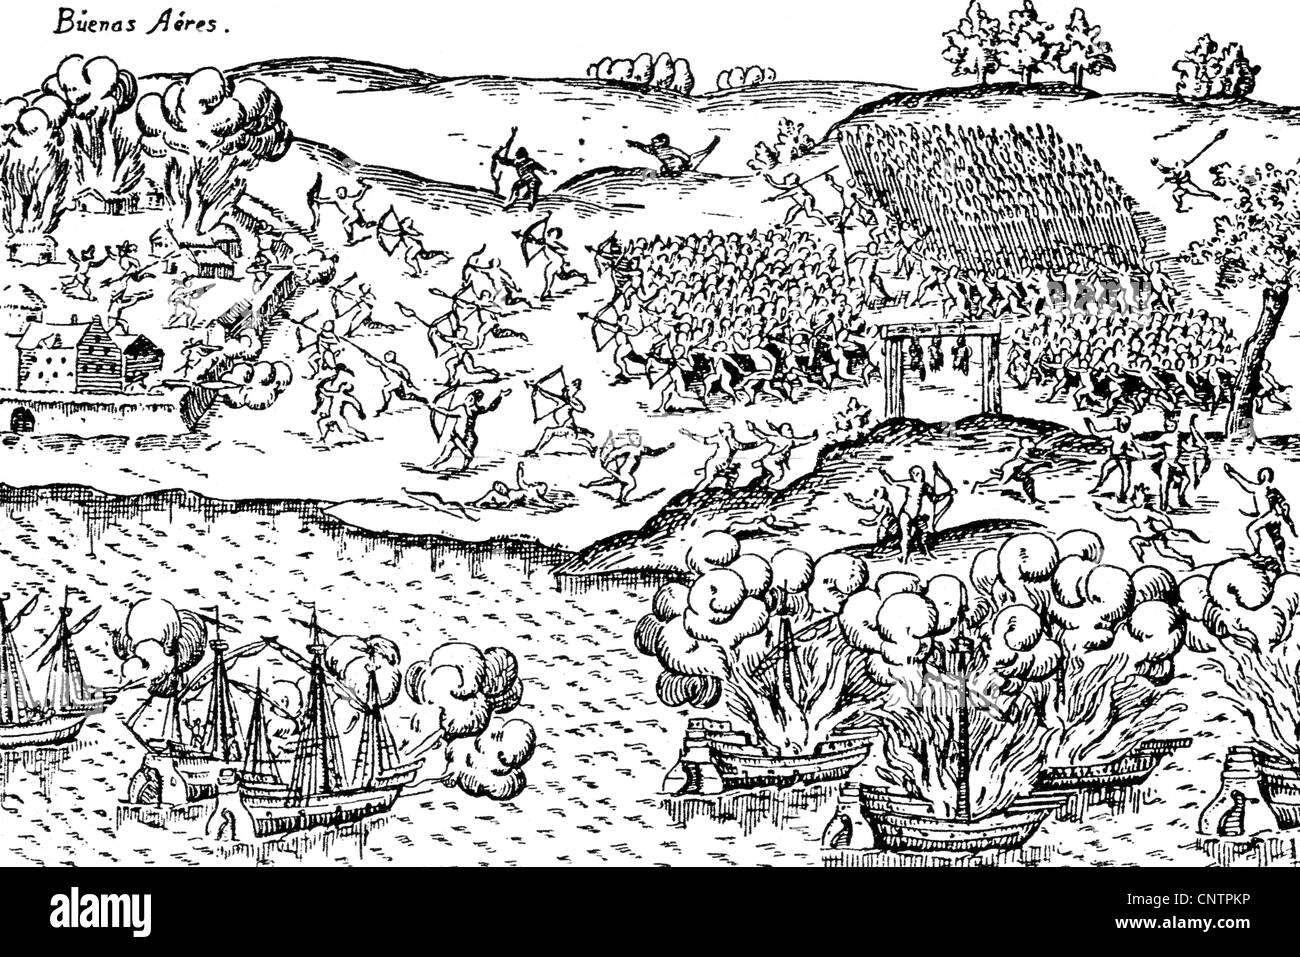 geography / travel, Argentina, Buenos Aires, the city under siege by Indians, copper engraving from itinerary by Ulrich Schmidl (1510 - circa 1580), Schmidel, fight, fighting, 16th century, military, attacking, attack, historic, historical, sailing ships, South America, people, Artist's Copyright has not to be cleared Stock Photo